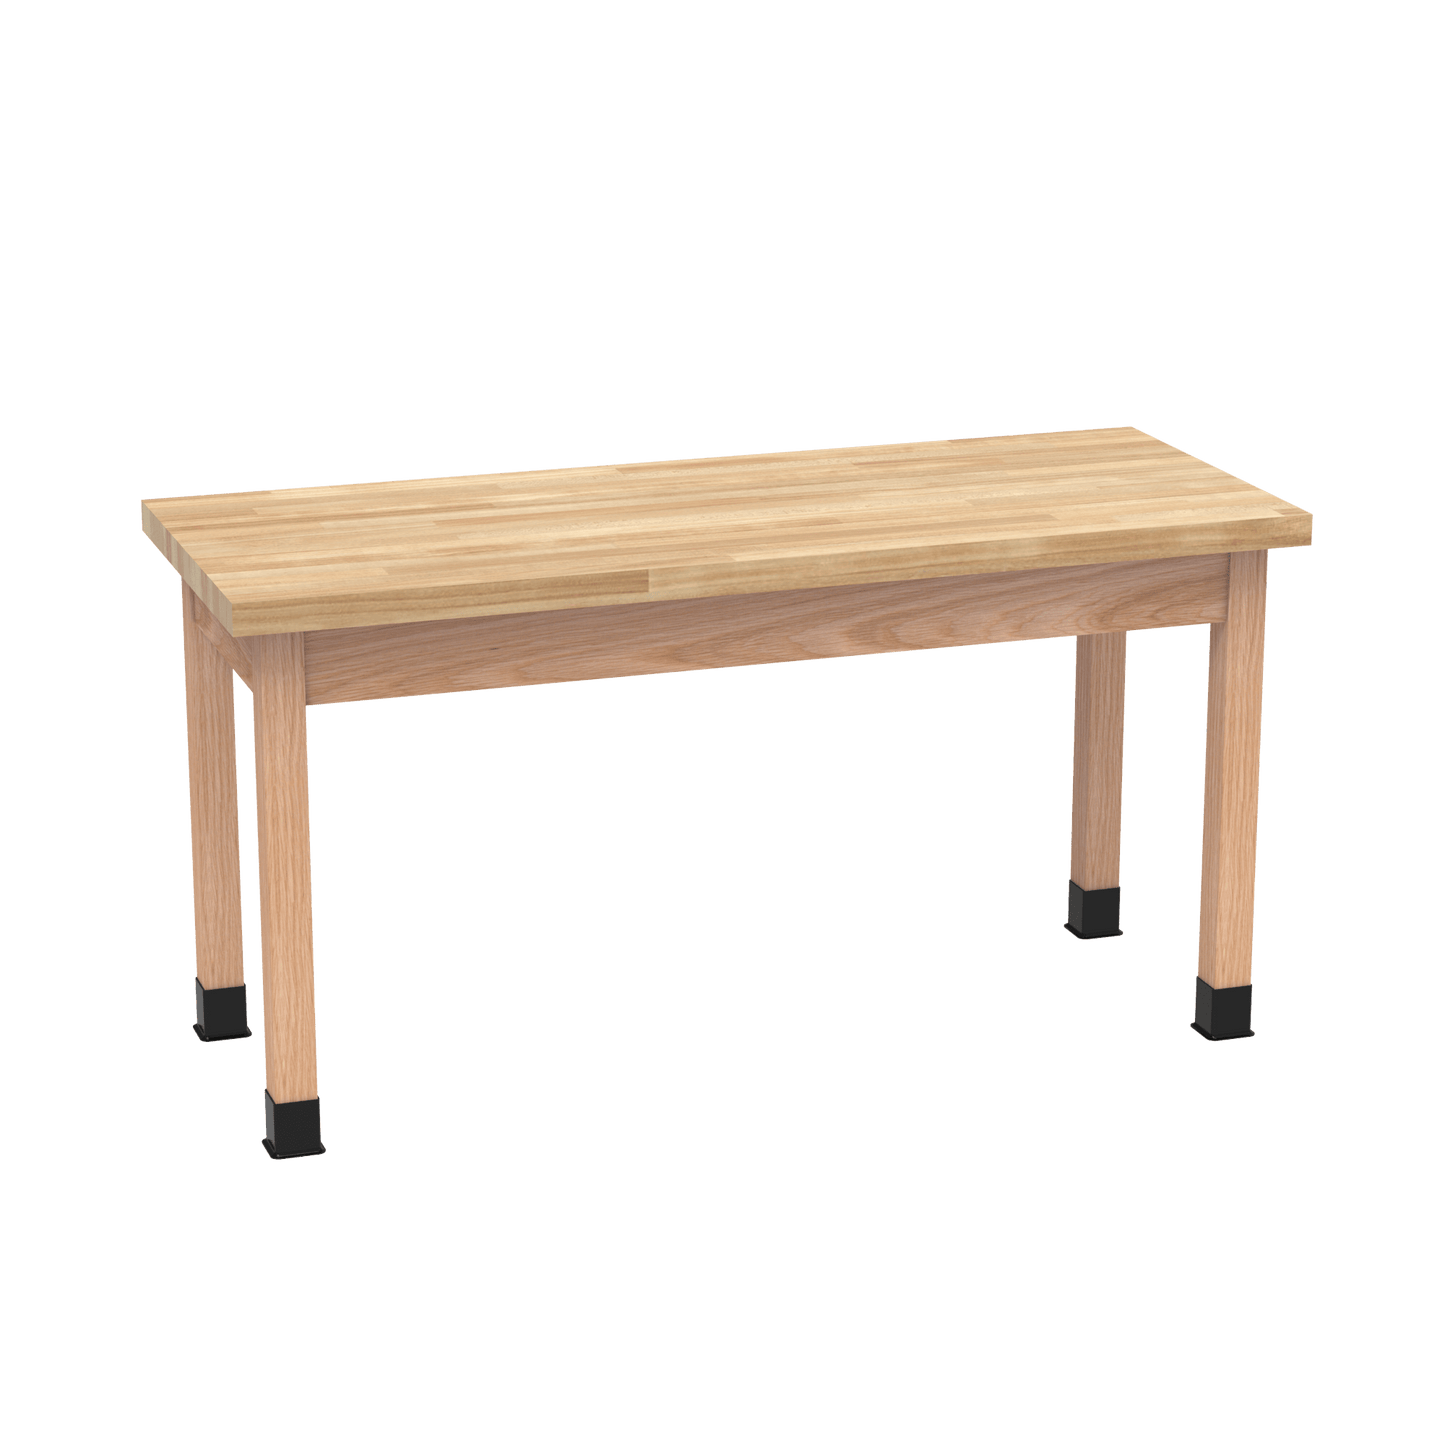 Diversified Woodcrafts Science Table - Plain Apron - 72" W x 42" D - Solid Wood Frame and Adjustable Glides - SchoolOutlet